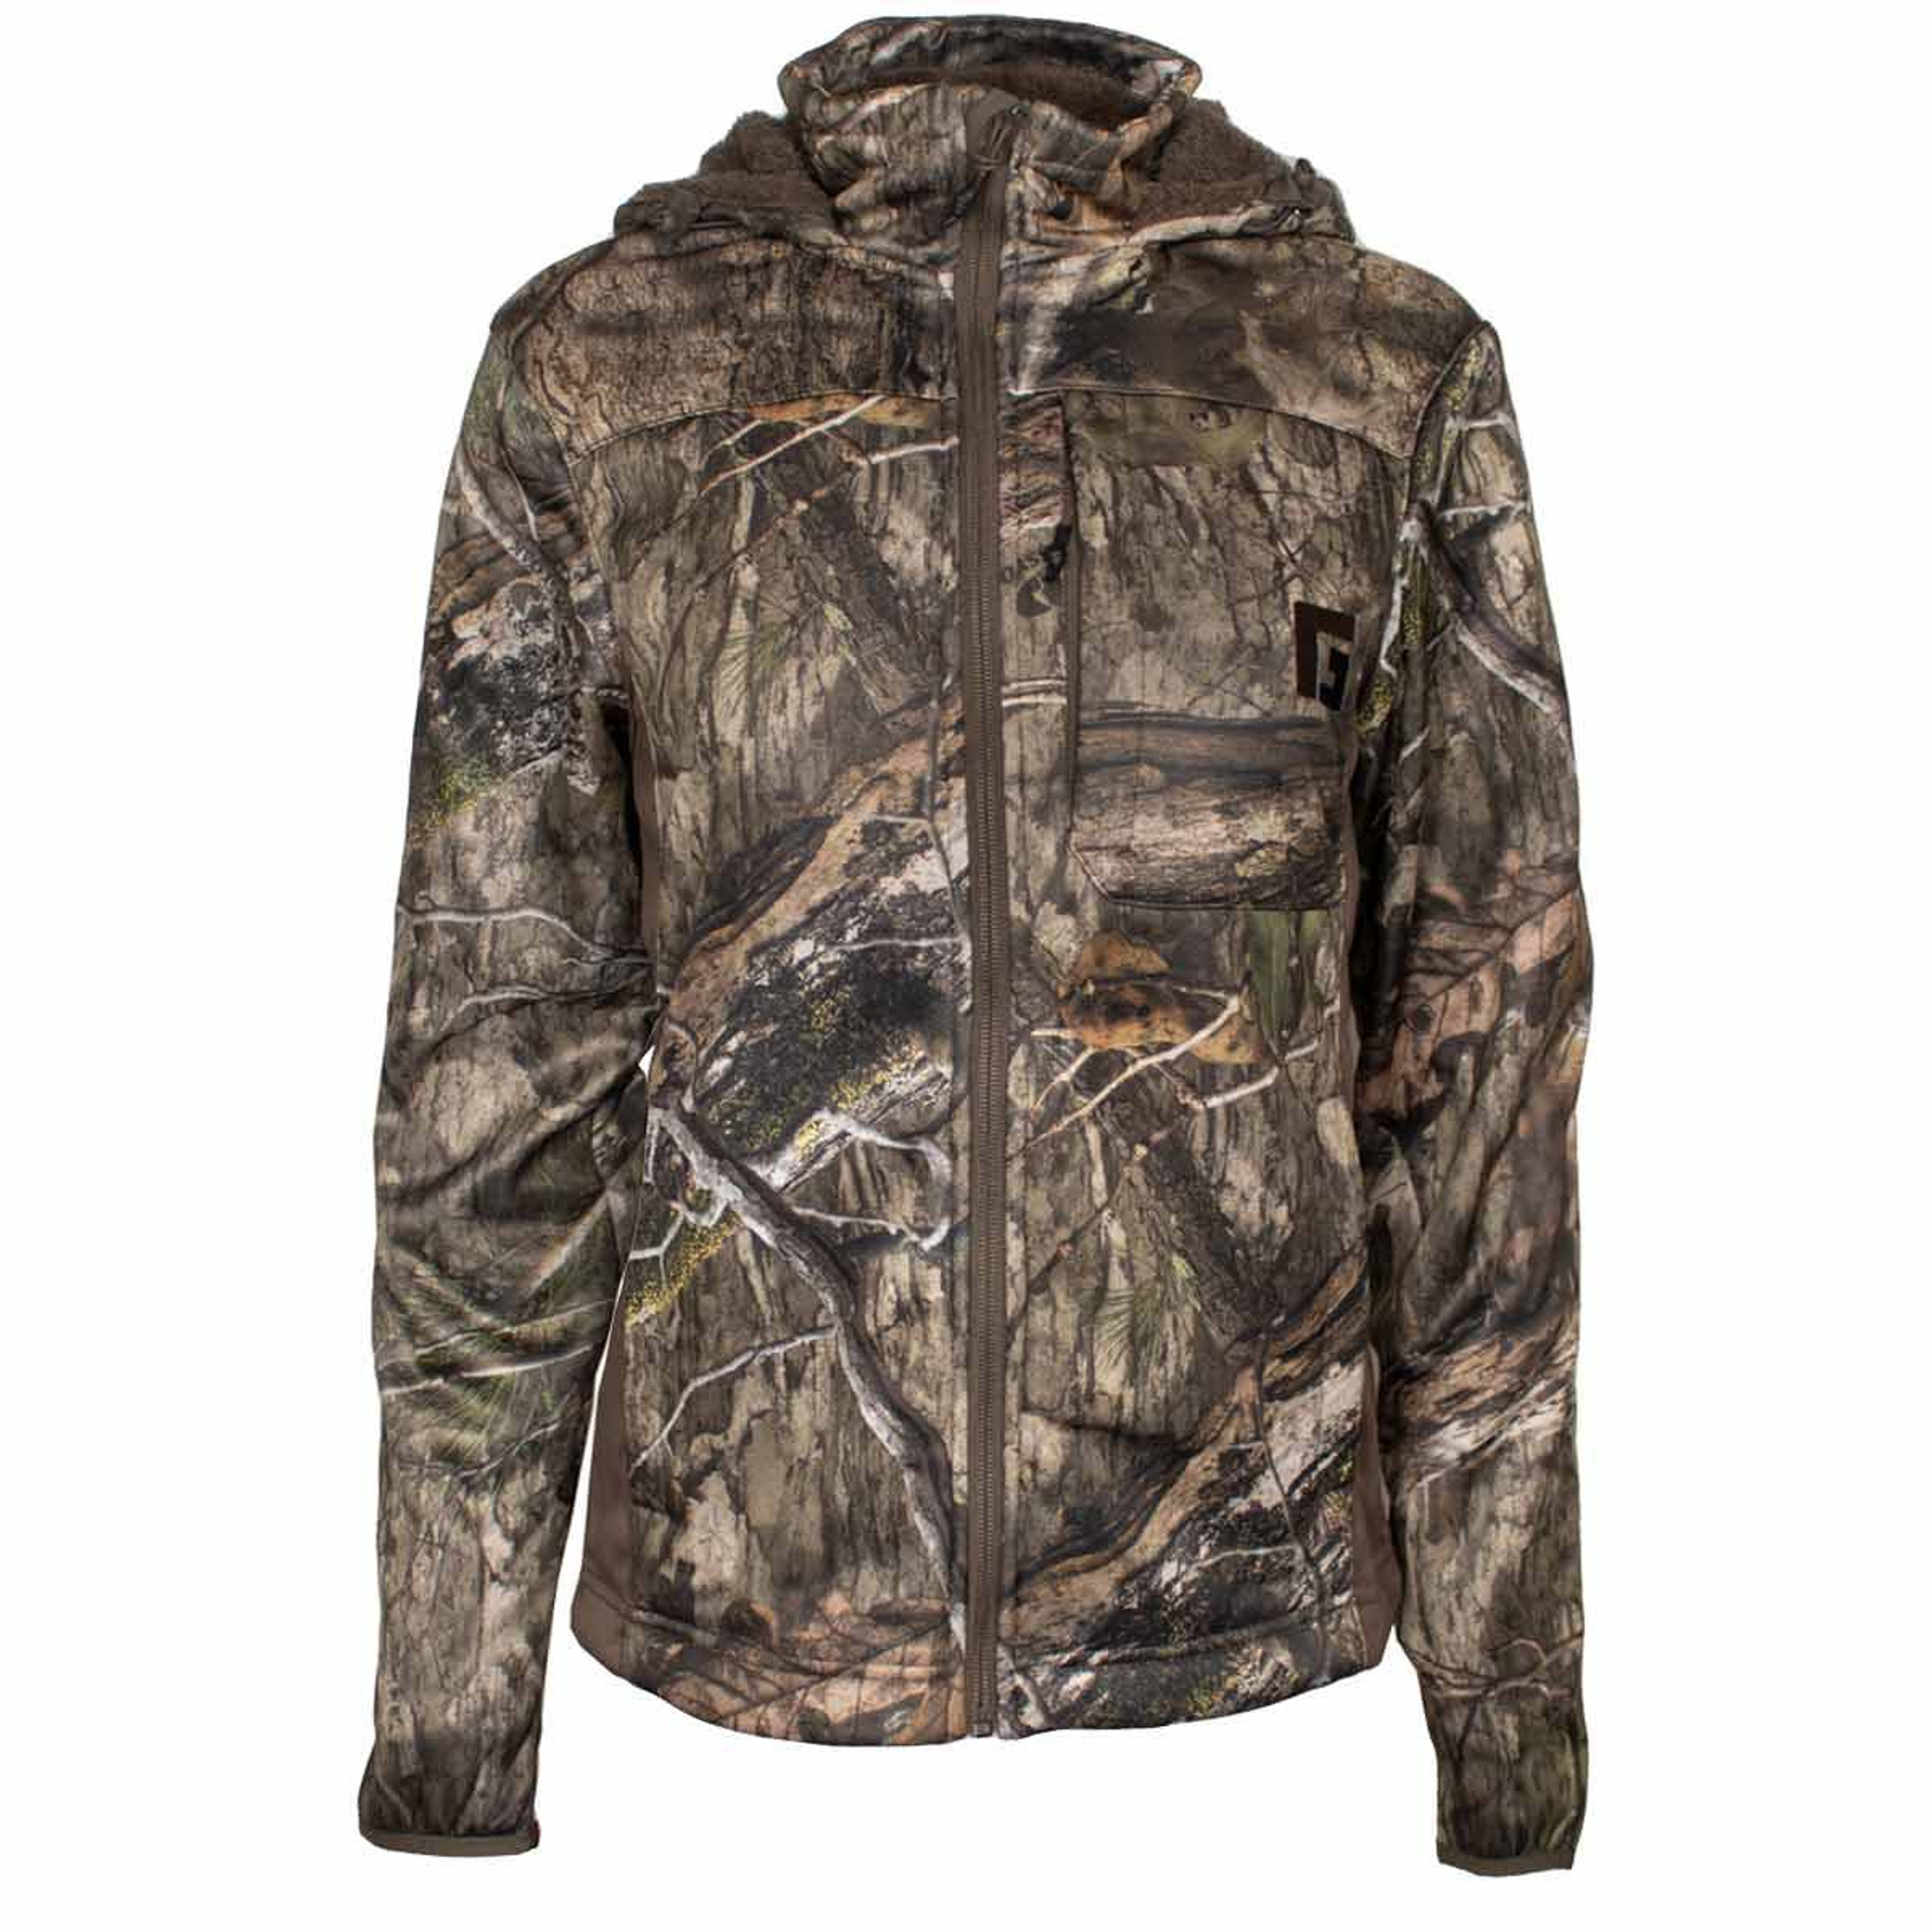 Rogers Toughman Whitetail Jacket | Rogers Sporting Goods